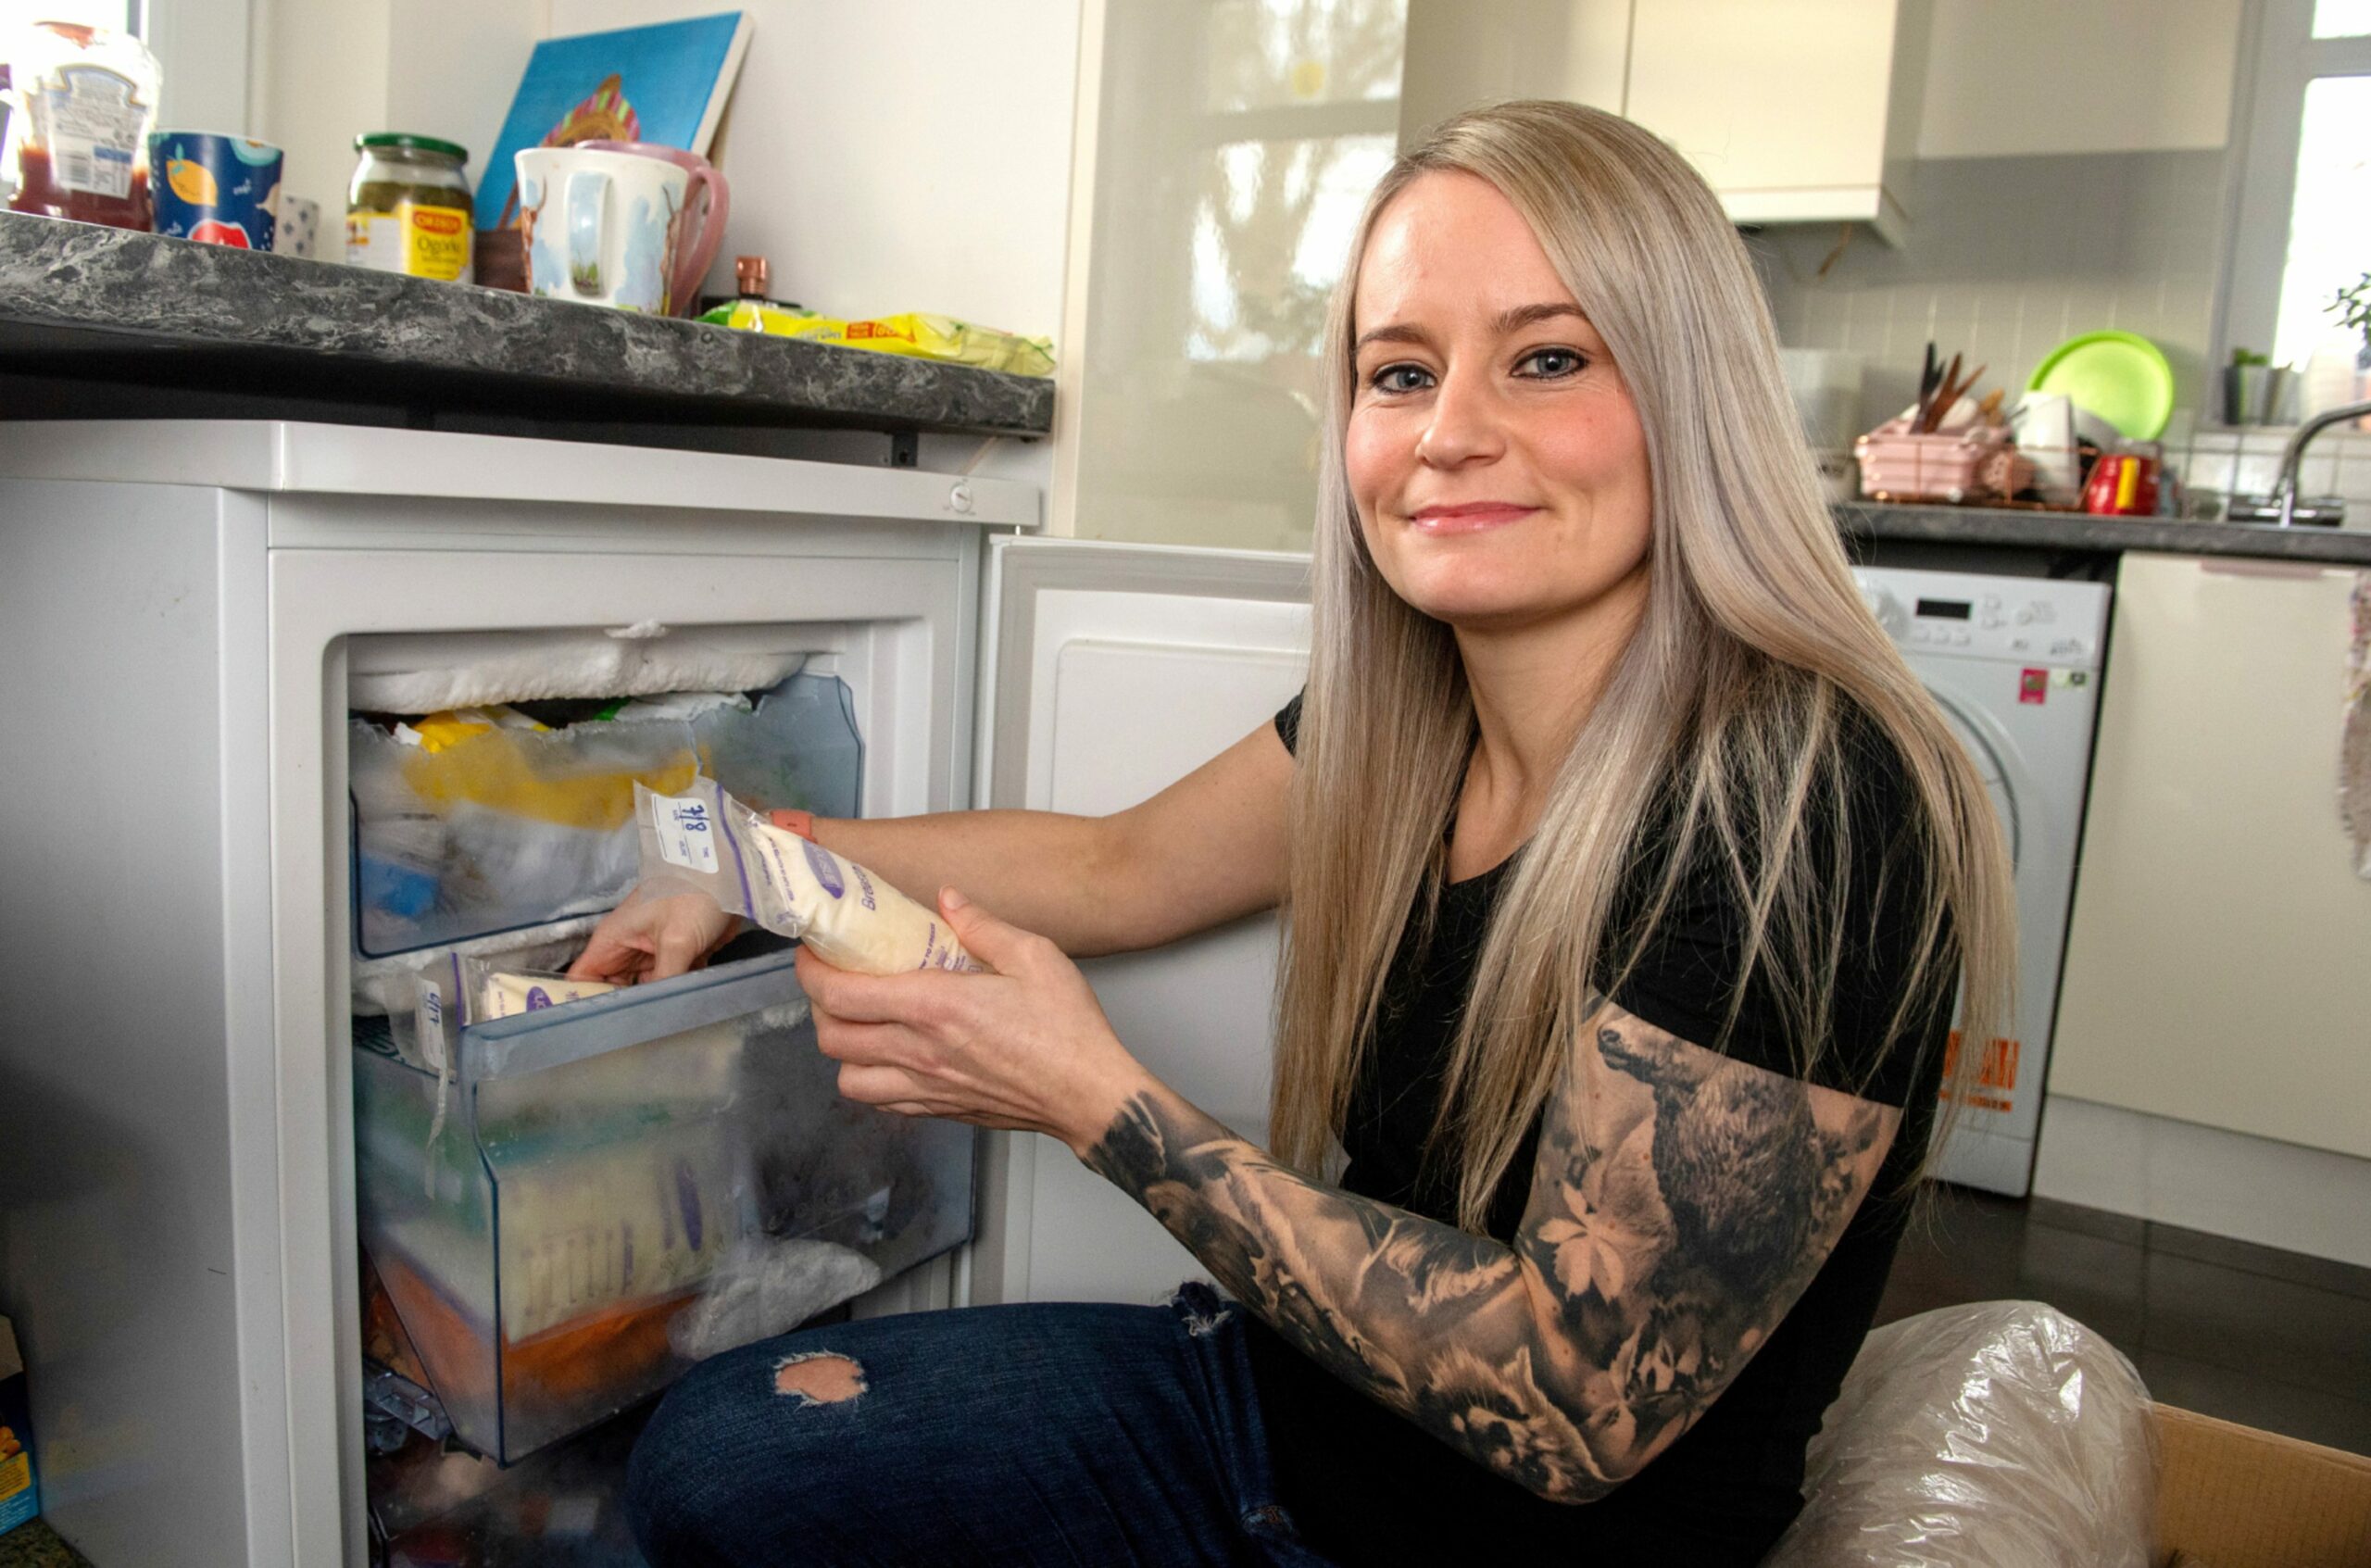 Steph keeps her freezer well-stocked with breastmilk. Image: Kath Flannery/DC Thomson